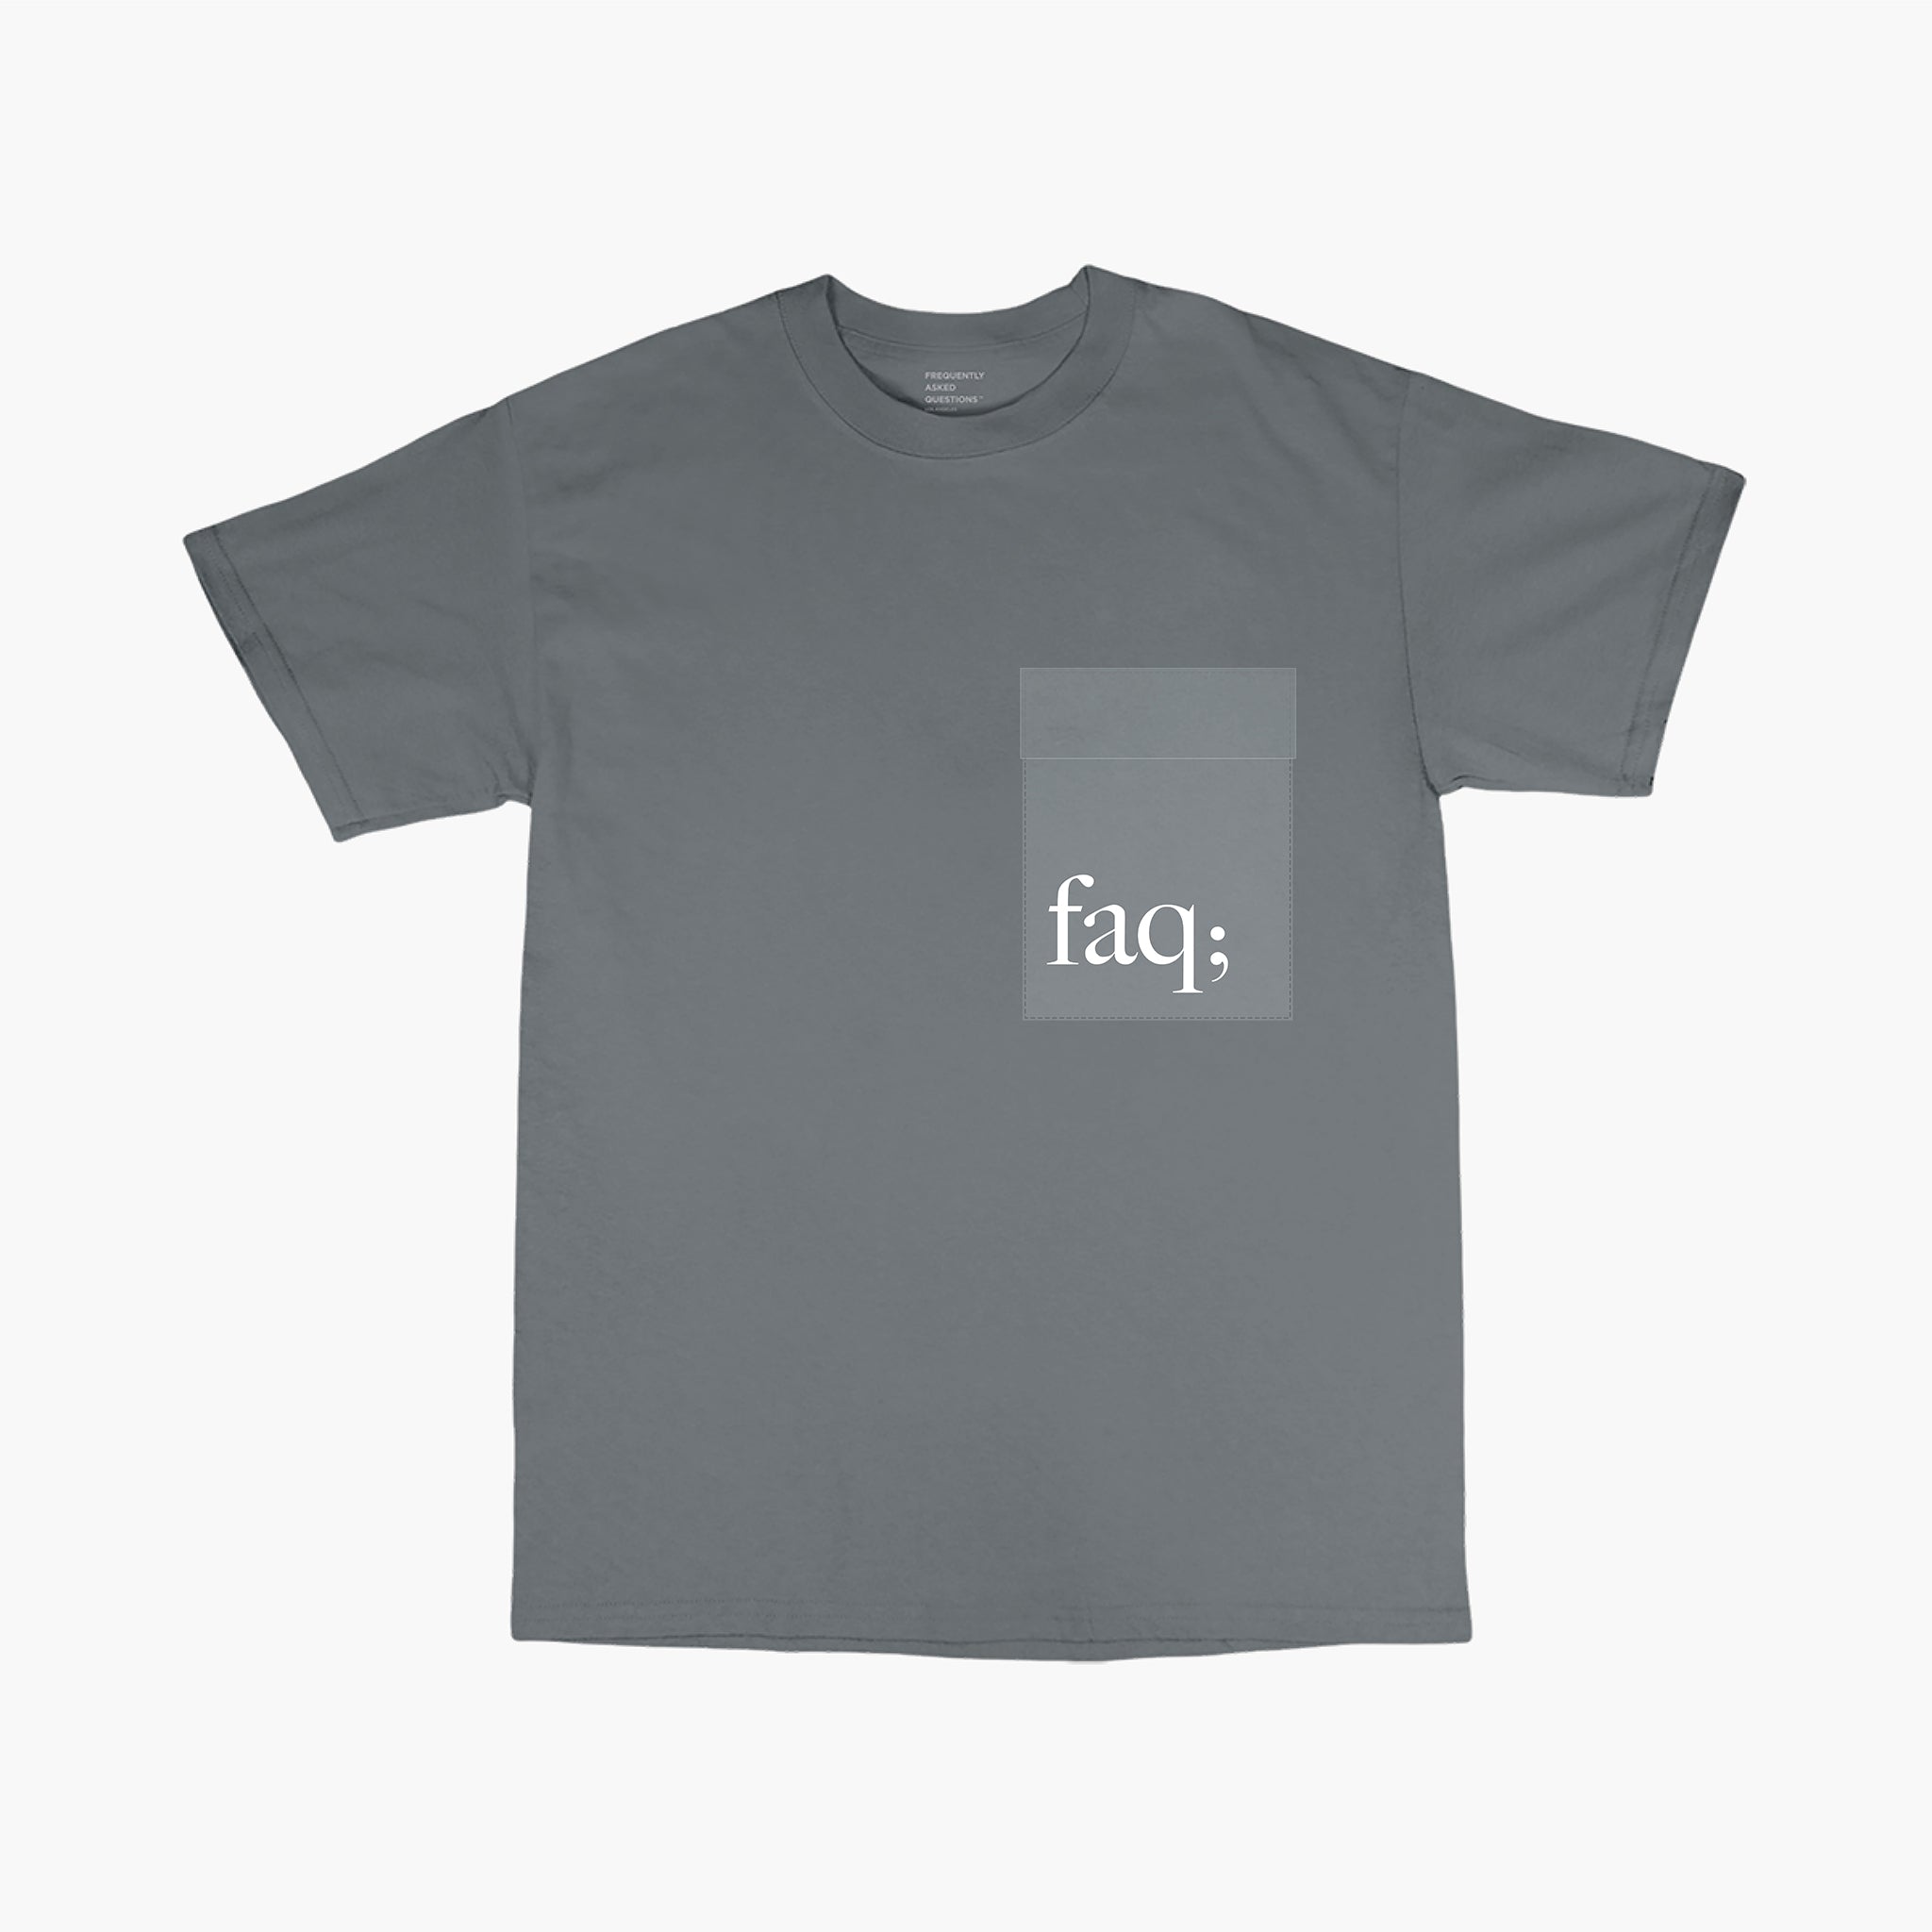 FAQ Pocket T-Shirt - Frequently Asked Questions